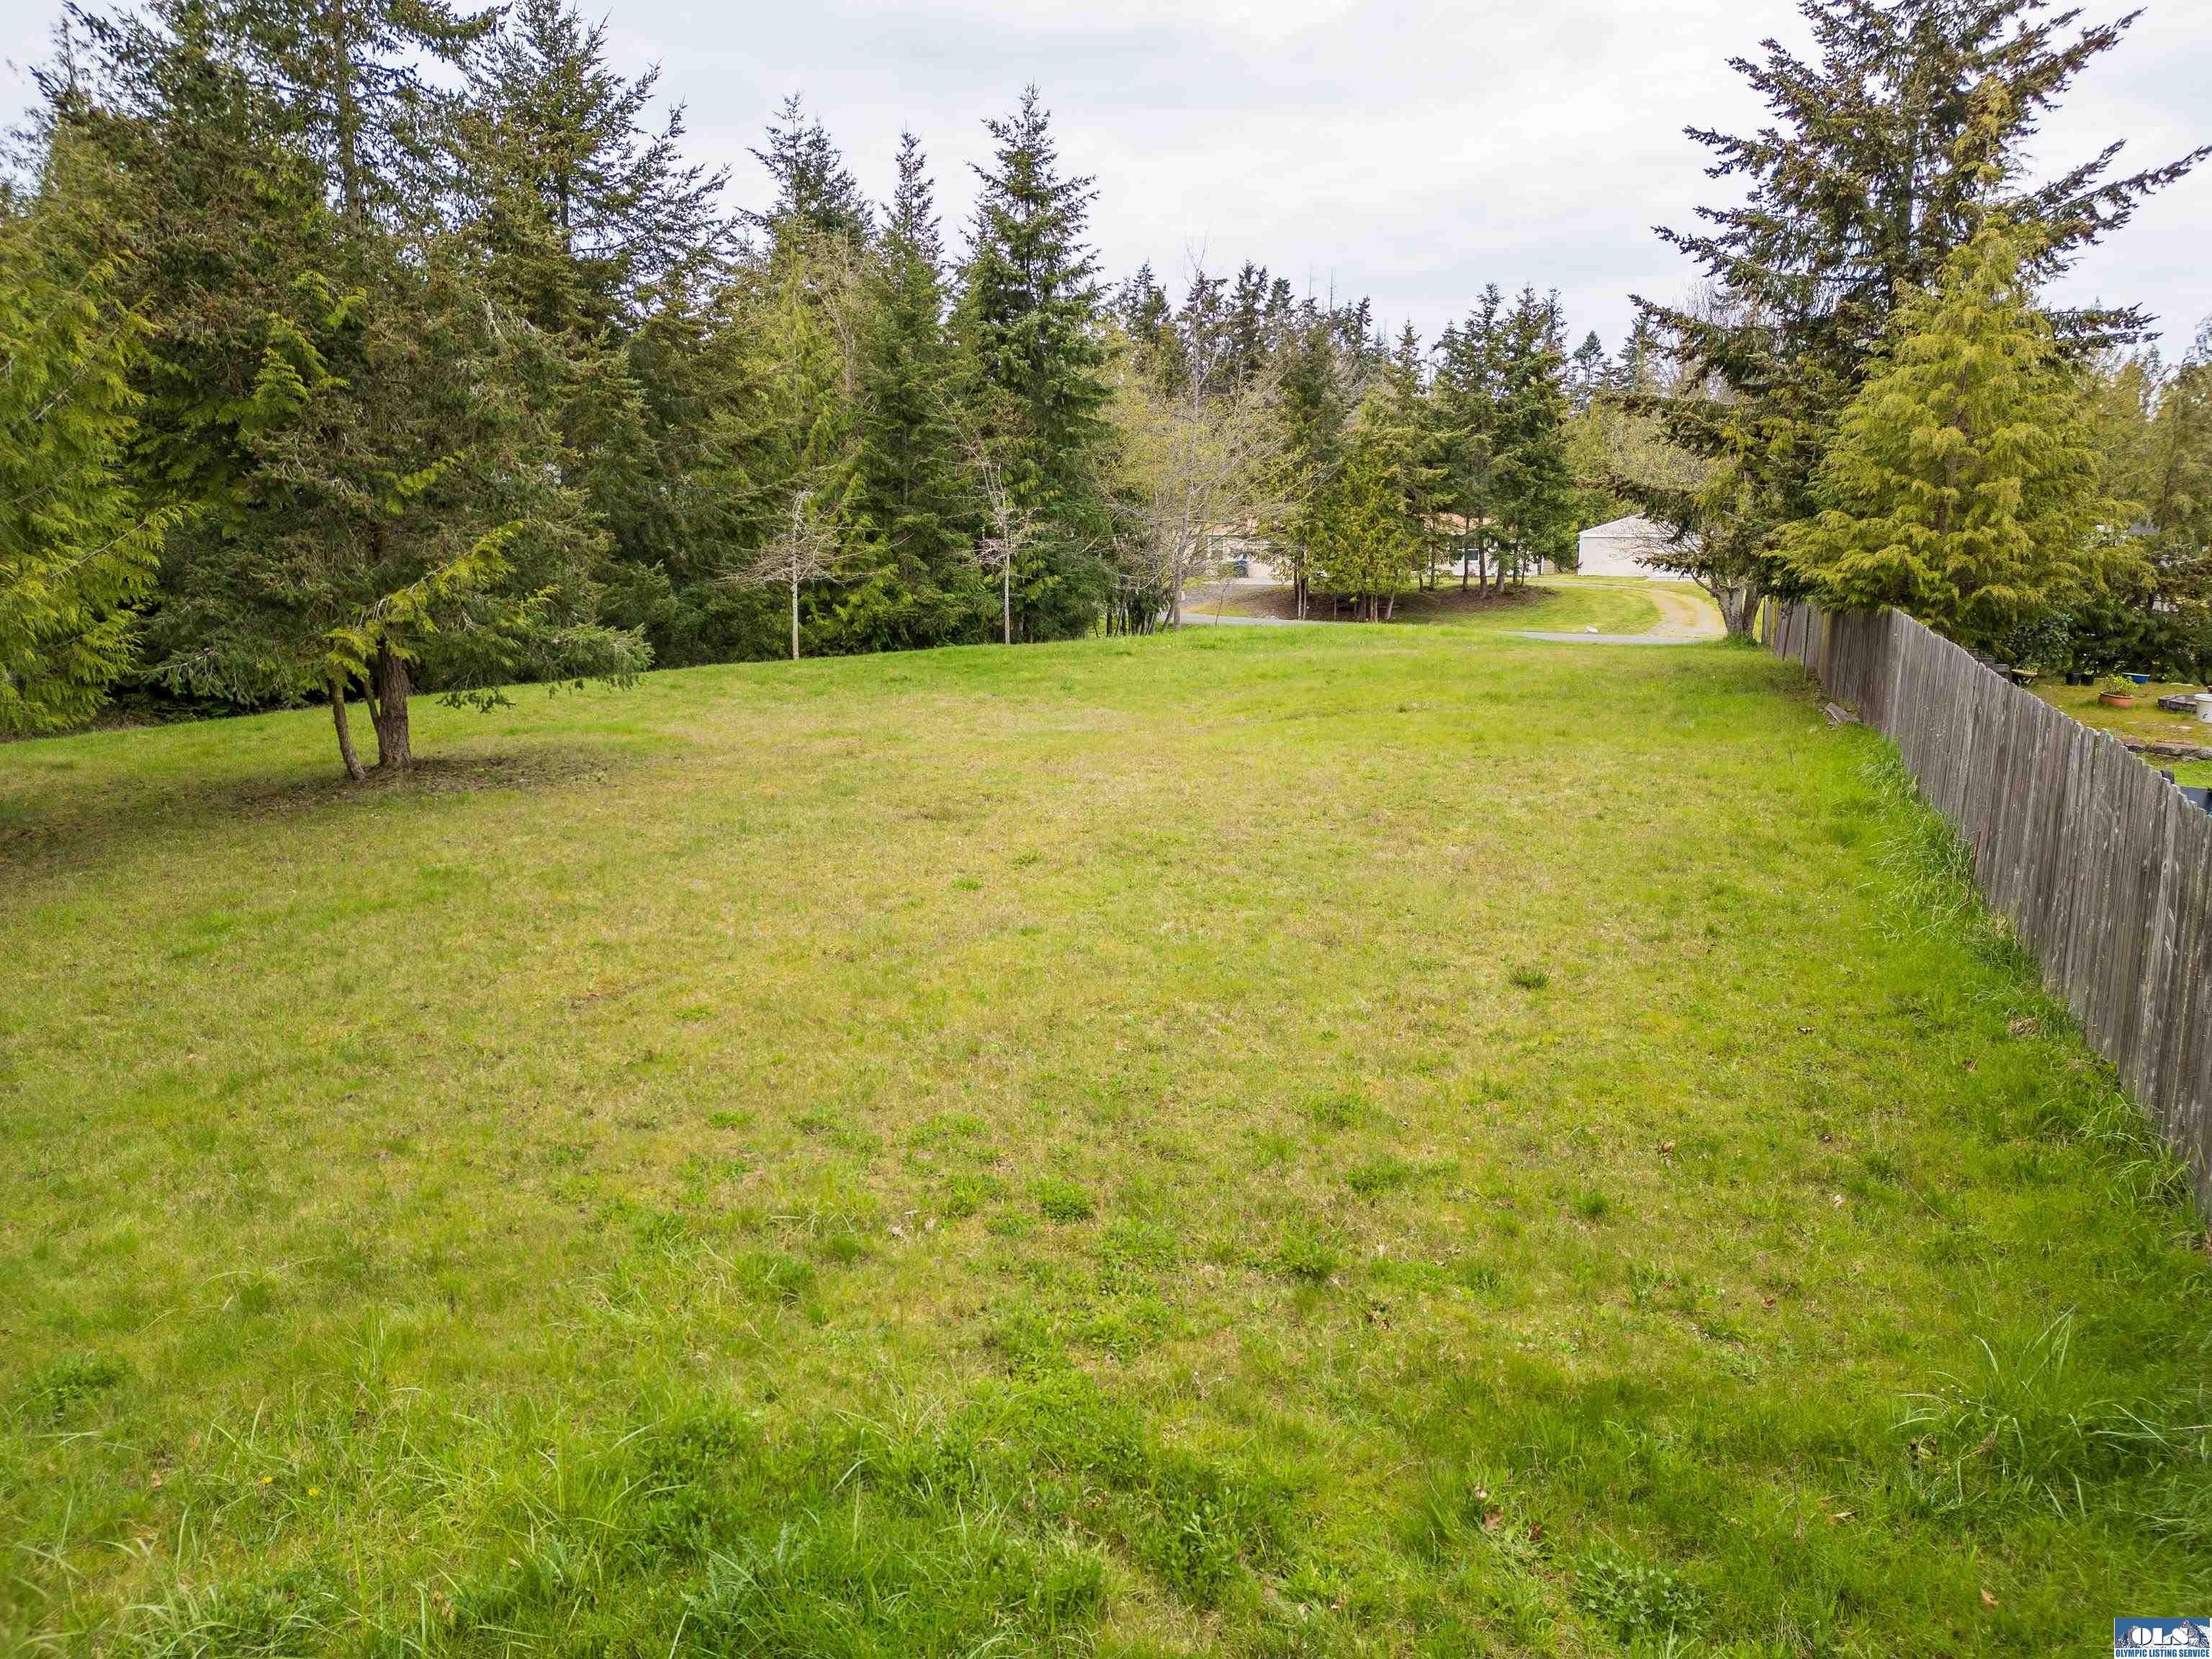 12. Rhododendron Drive Lot 5